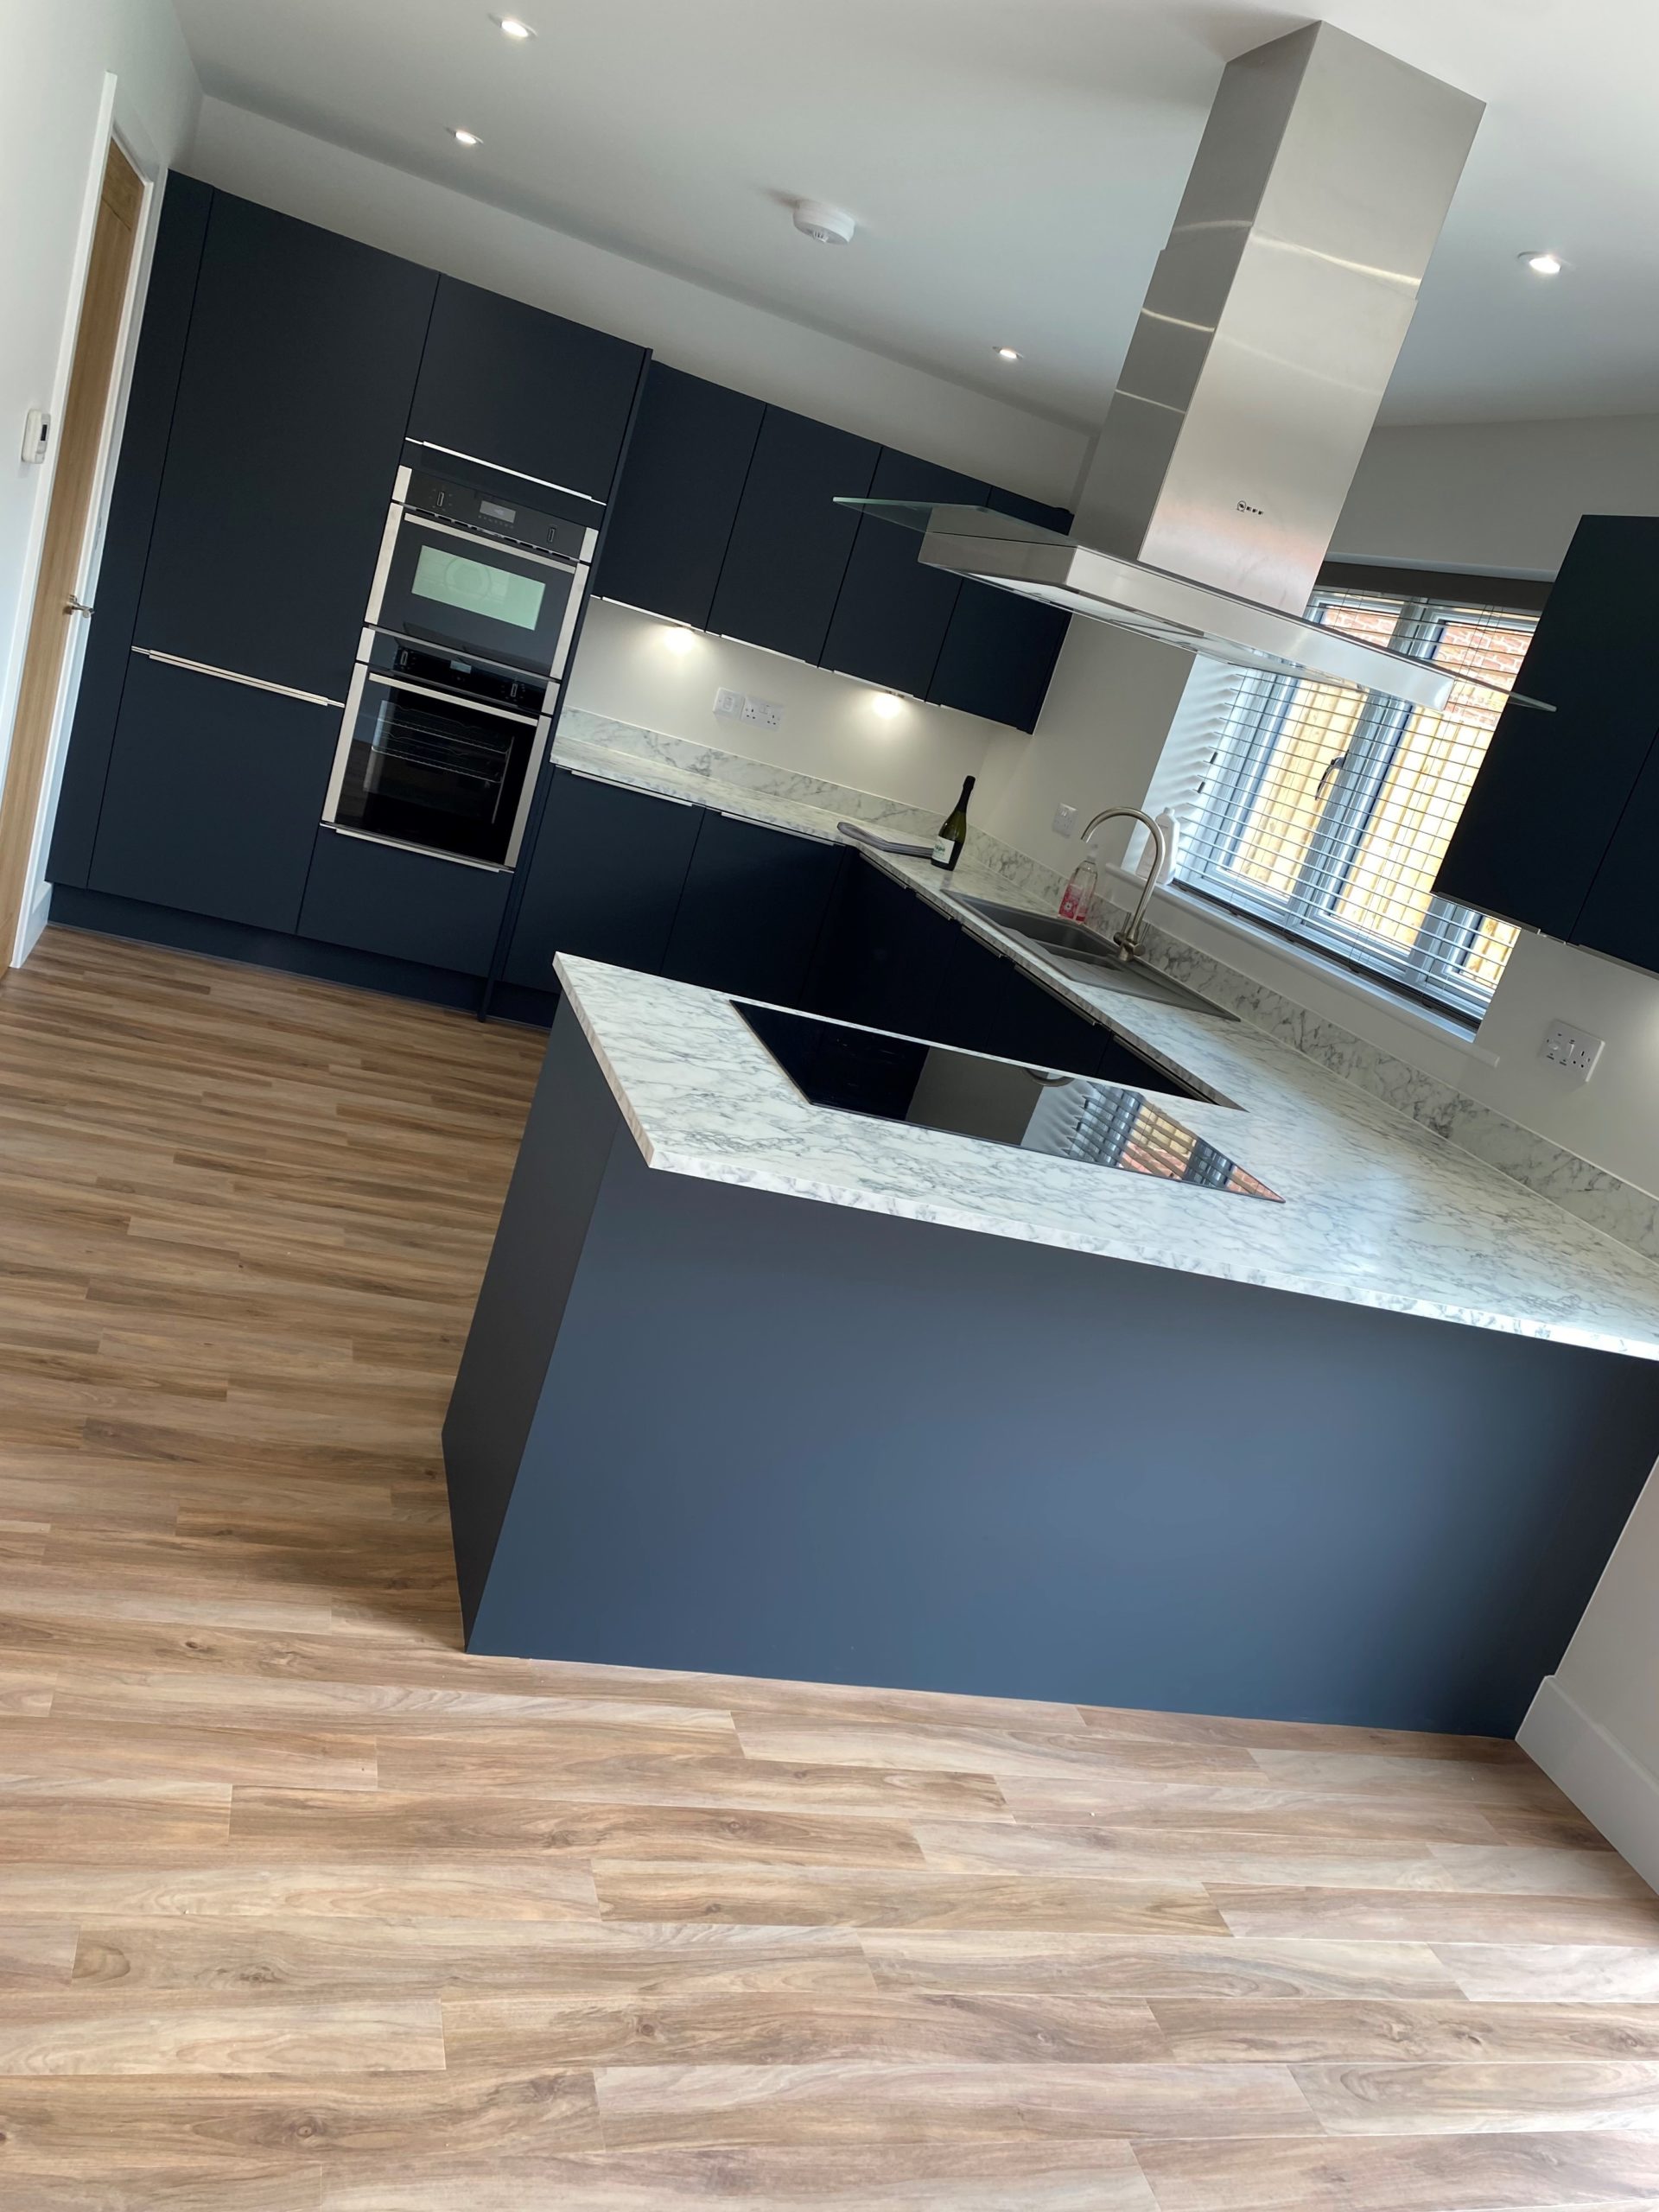 navigate to https://www.turnbull.co.uk/showrooms/case-studies/kitchens/symphony-navy-kitchen/